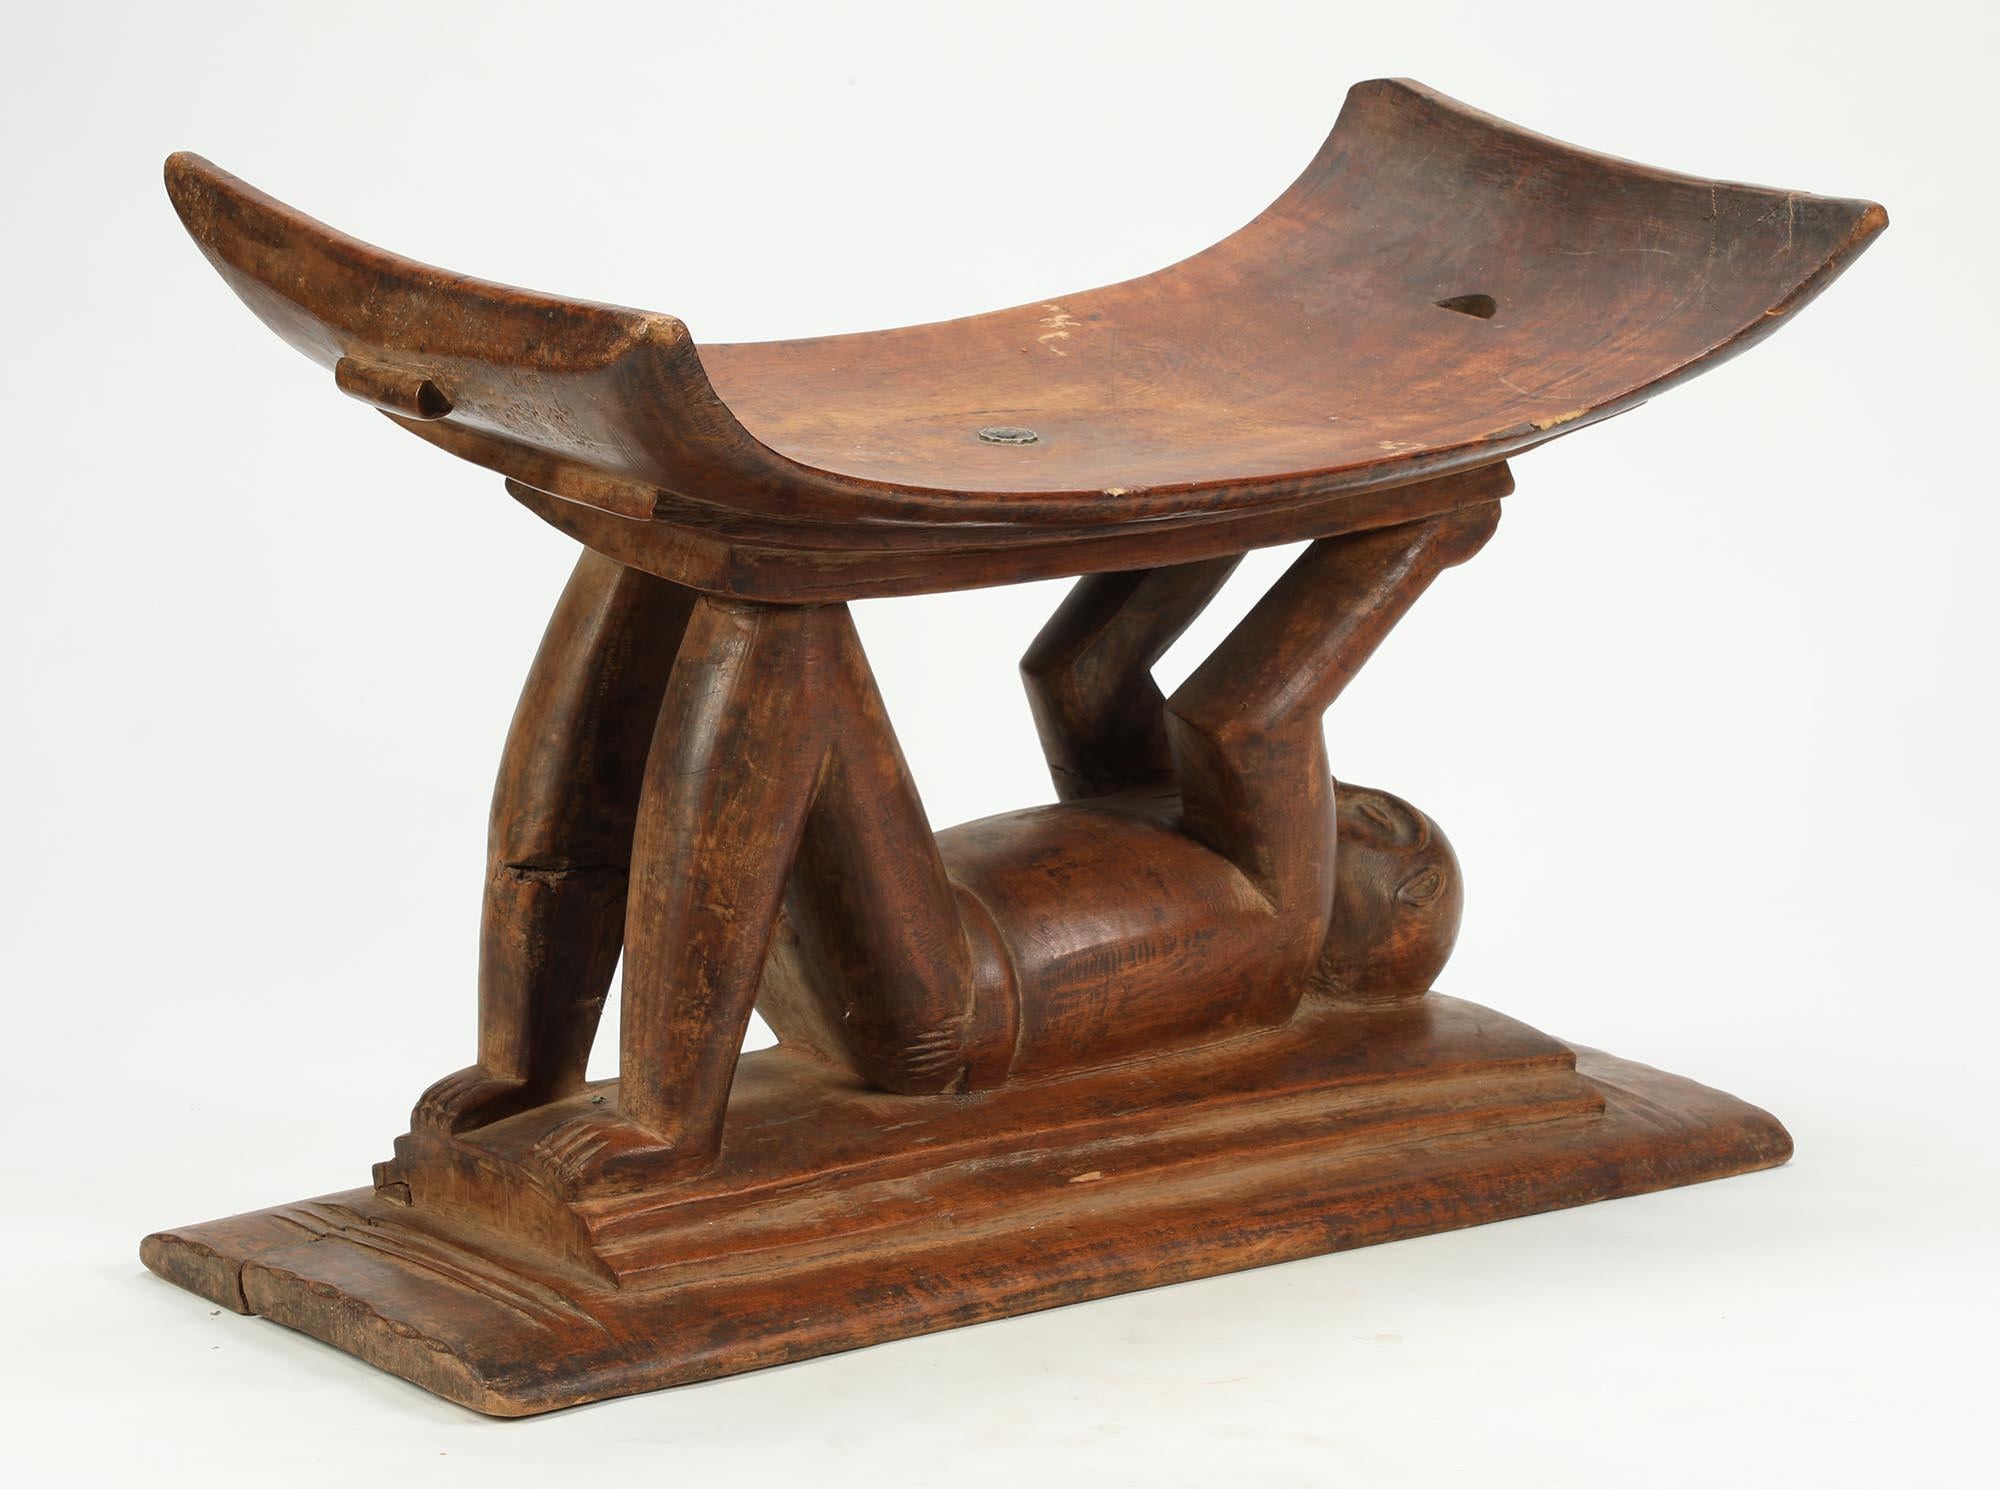 The supports for Akan stools take many forms, they can be purely geometric or architectural with simple posts and columns, or, as in this case, figural, with humans or animals supporting the curved seat.
Created in the early to mid-20th century, by